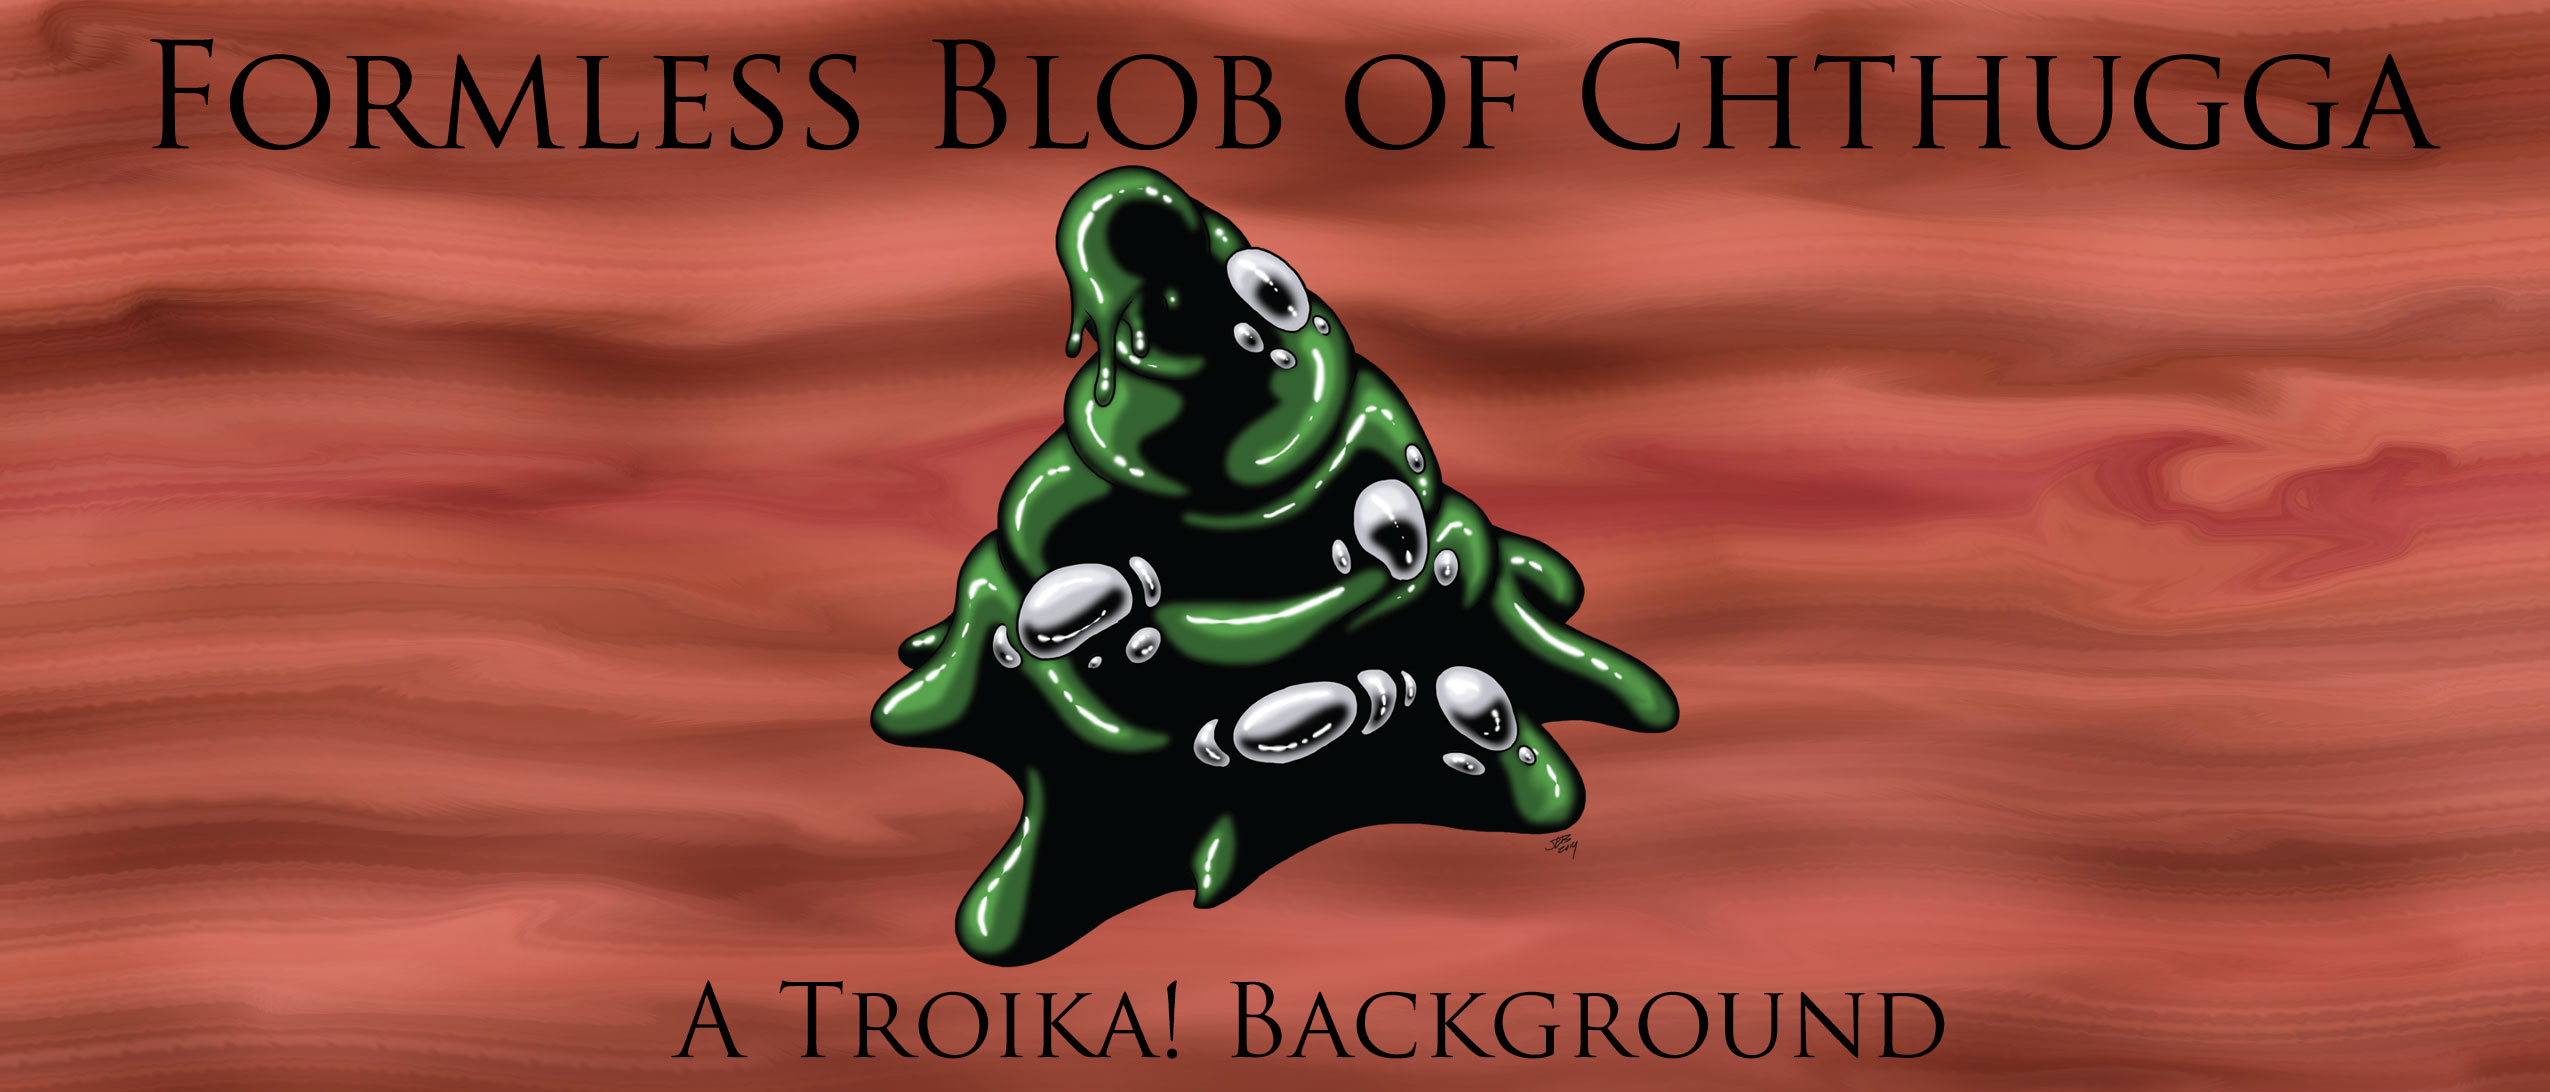 Formless Blob of Chthugga - A Troika! Background